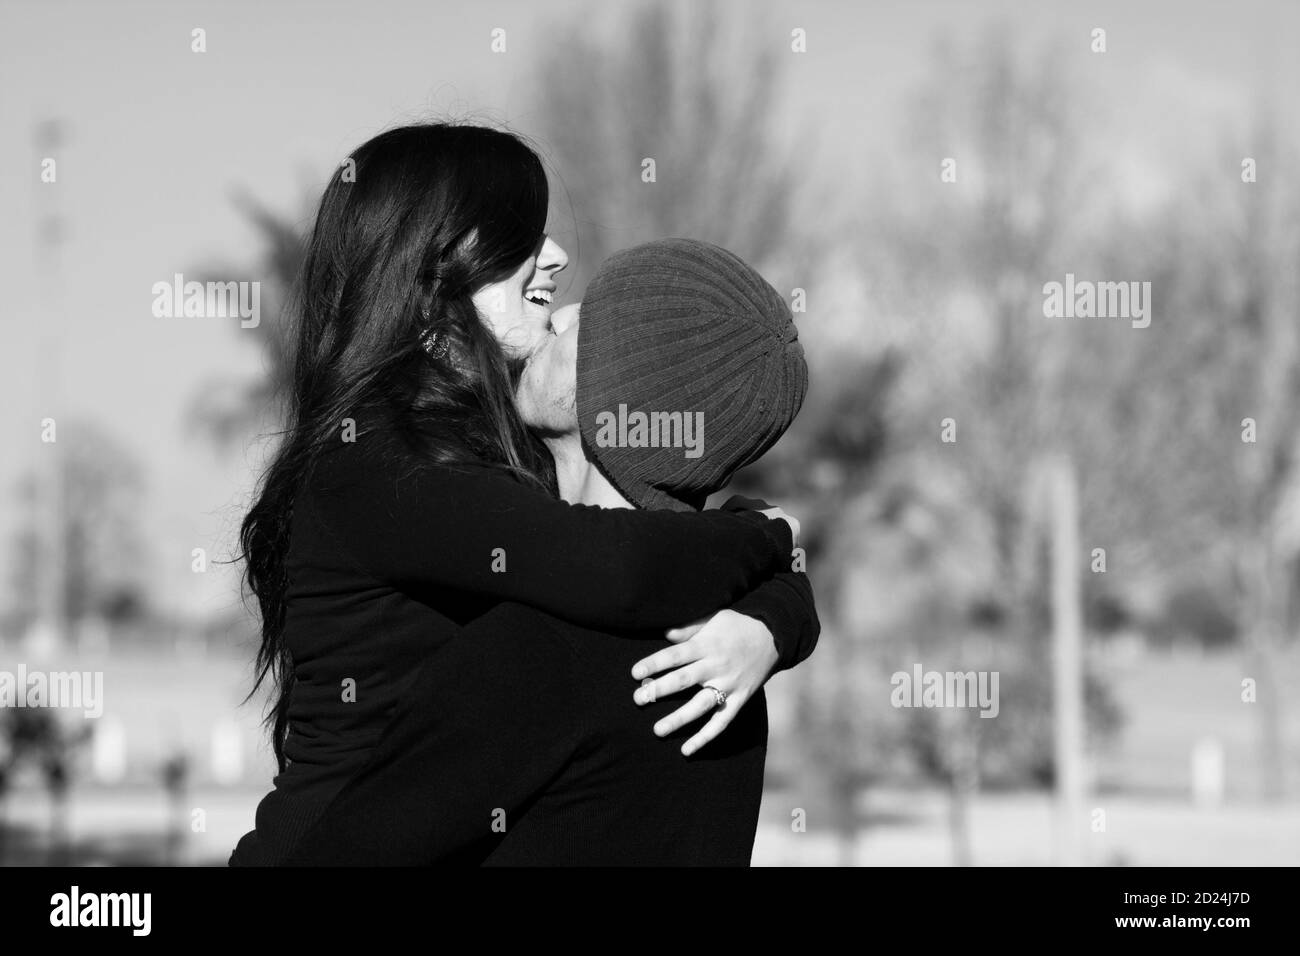 A couple embrace on a sunny winter day Stock Photo